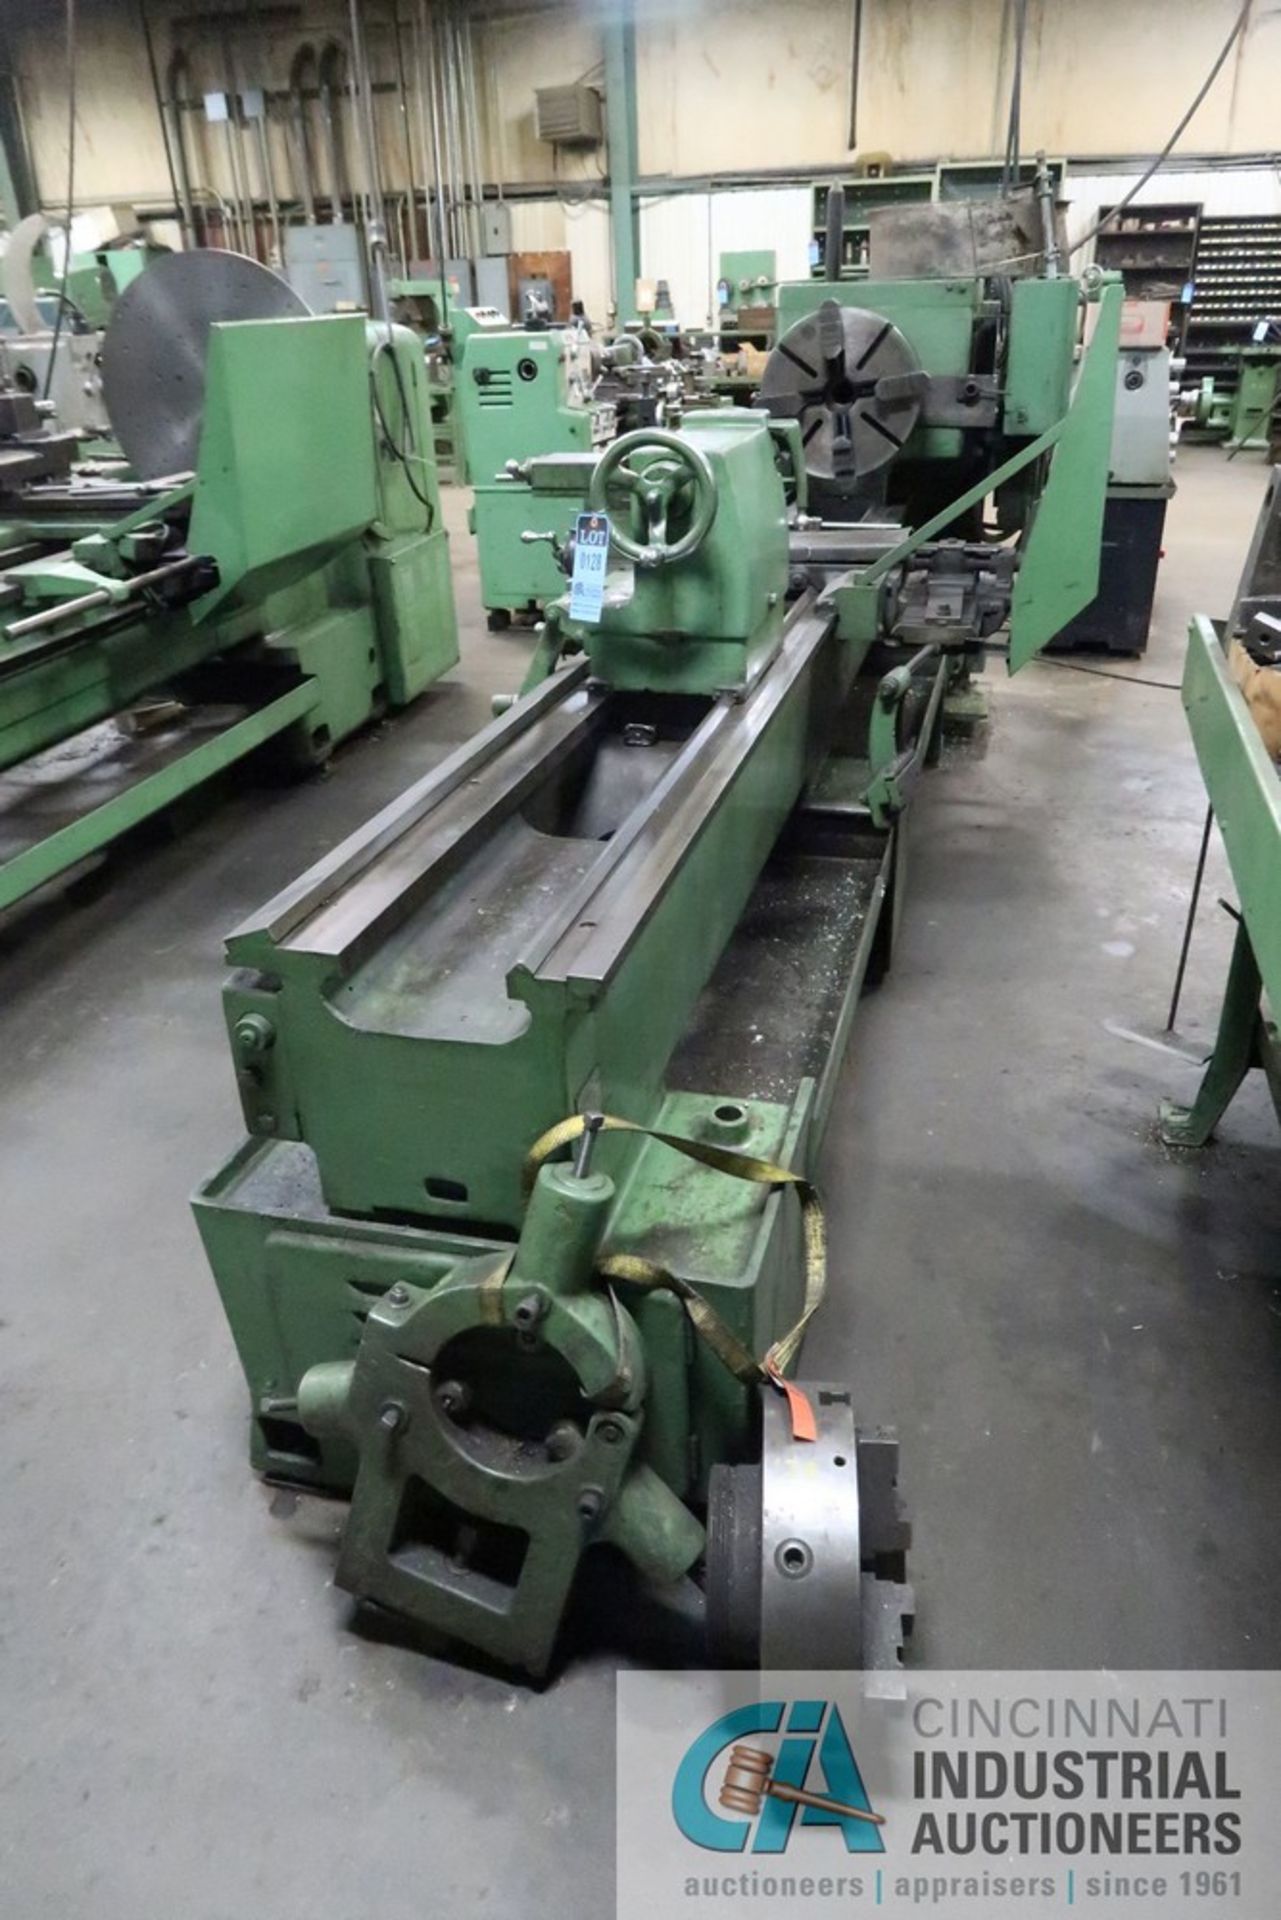 26" X 96" LEBLOND ENGINE LATHE; S/N 5H-555, 2" SPINDLE HOLE, 18" 4-JAW CHUCK, TAPER ATTACHMENT, - Image 4 of 15